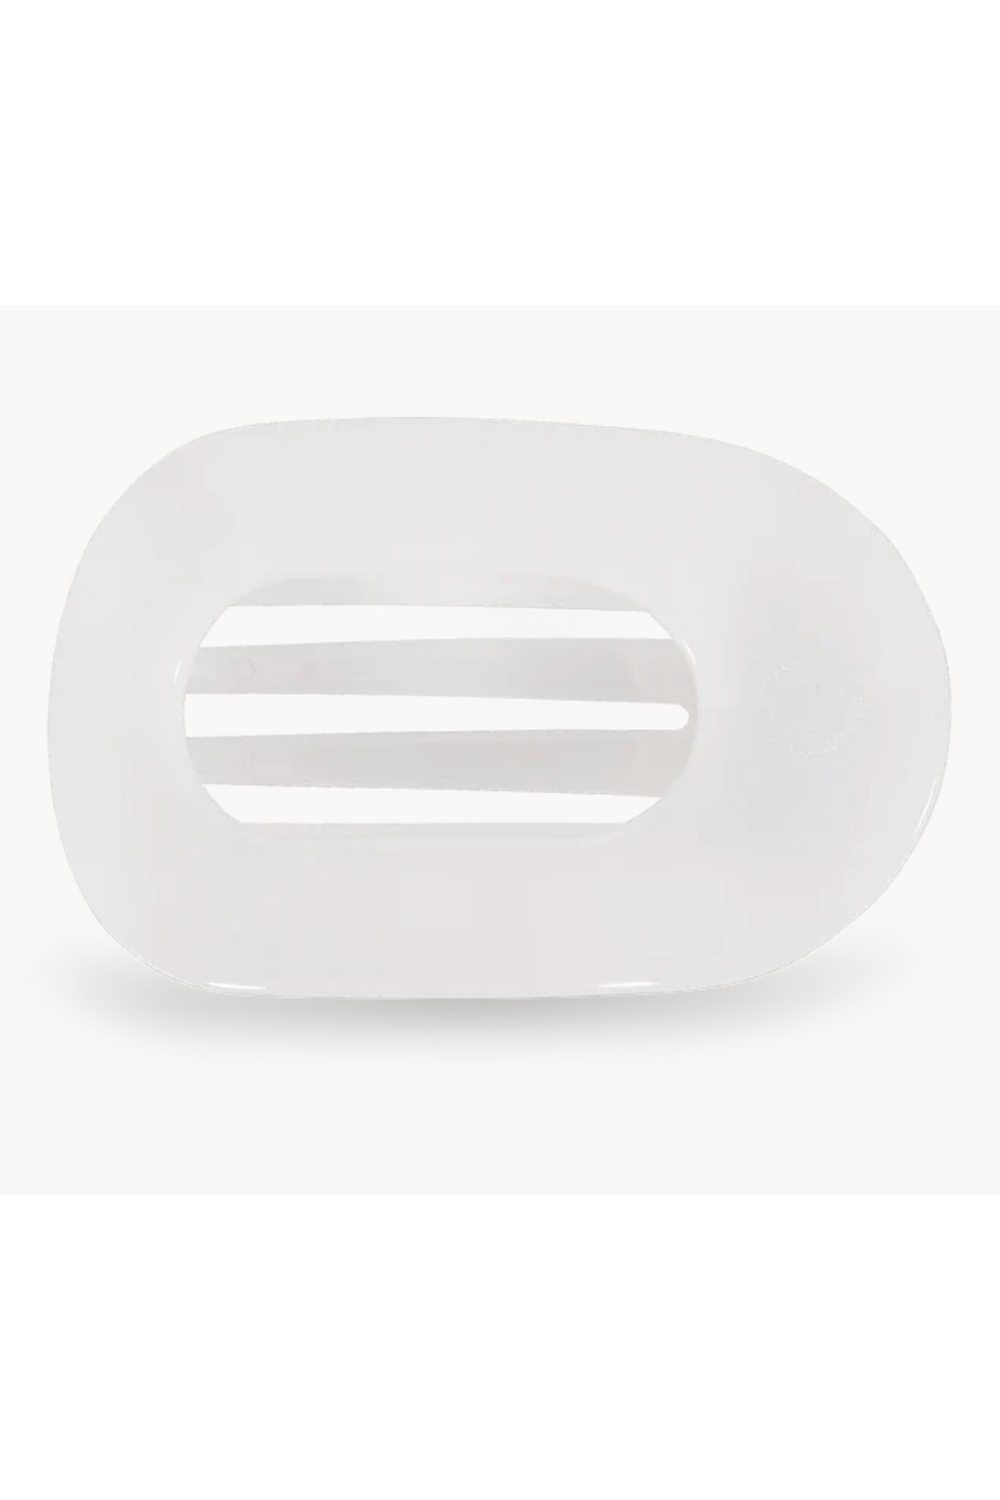 Teleties Flat Round Hair Clip - Coconut White